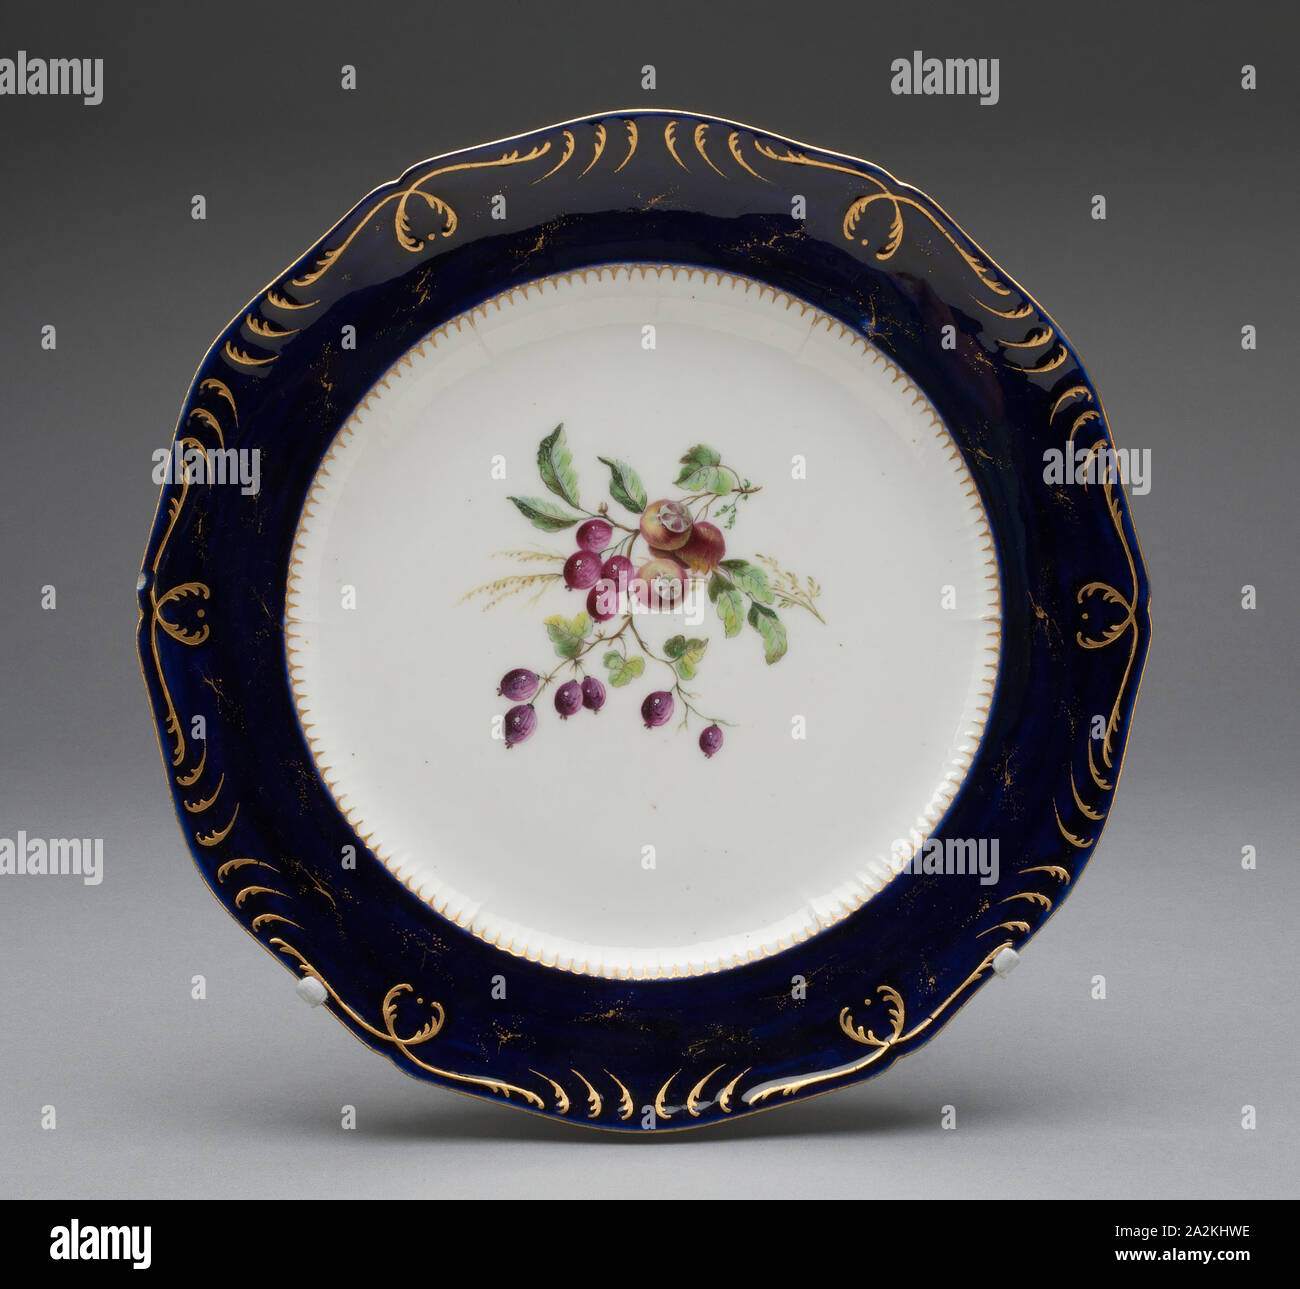 Plate, c. 1752, Vincennes Porcelain Manufactory, French, founded 1740 (known as Sèvres from 1756), Vincennes, Soft-paste porcelain, dark blue ground, polychrome enamels, and gilding, H. 3.5 cm (1 3/8 in.), diam. 25.2 cm (9 15/16 in Stock Photo